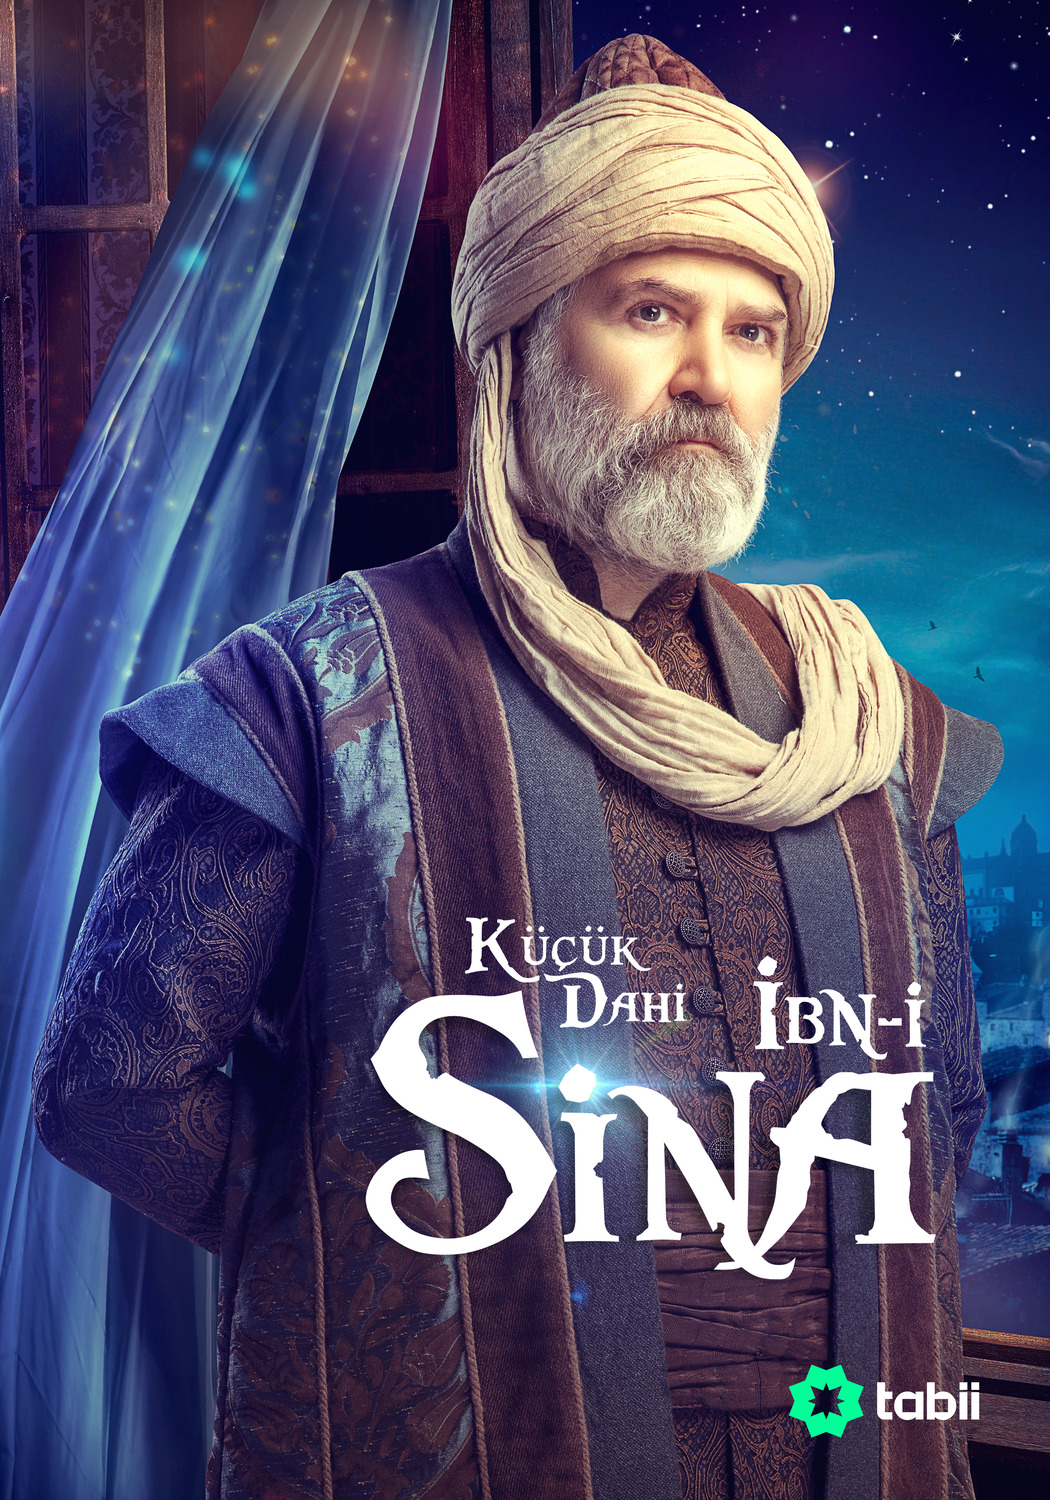 Extra Large TV Poster Image for Ibn-I Sina (#4 of 7)